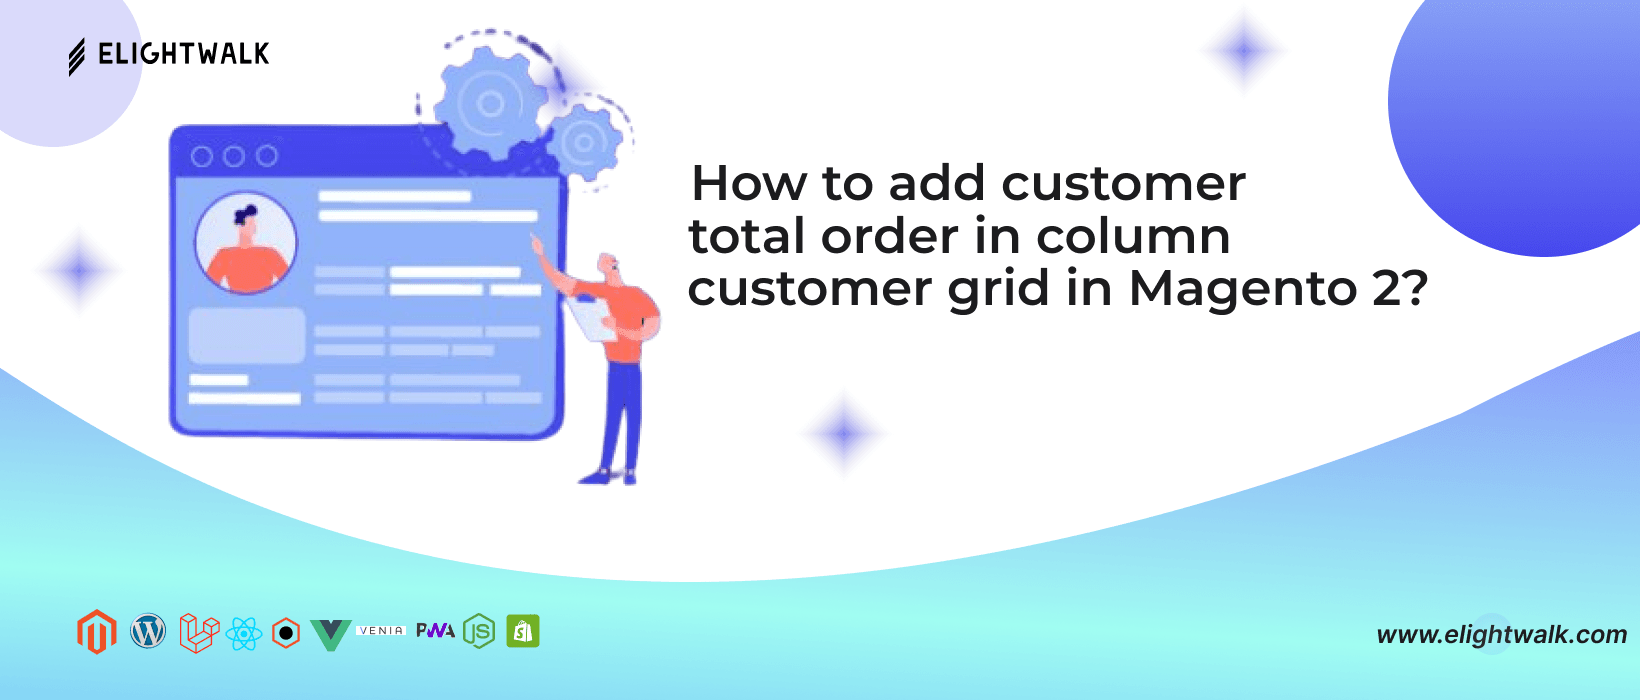 How to add customer total order in the column customer grid in Magento 2?